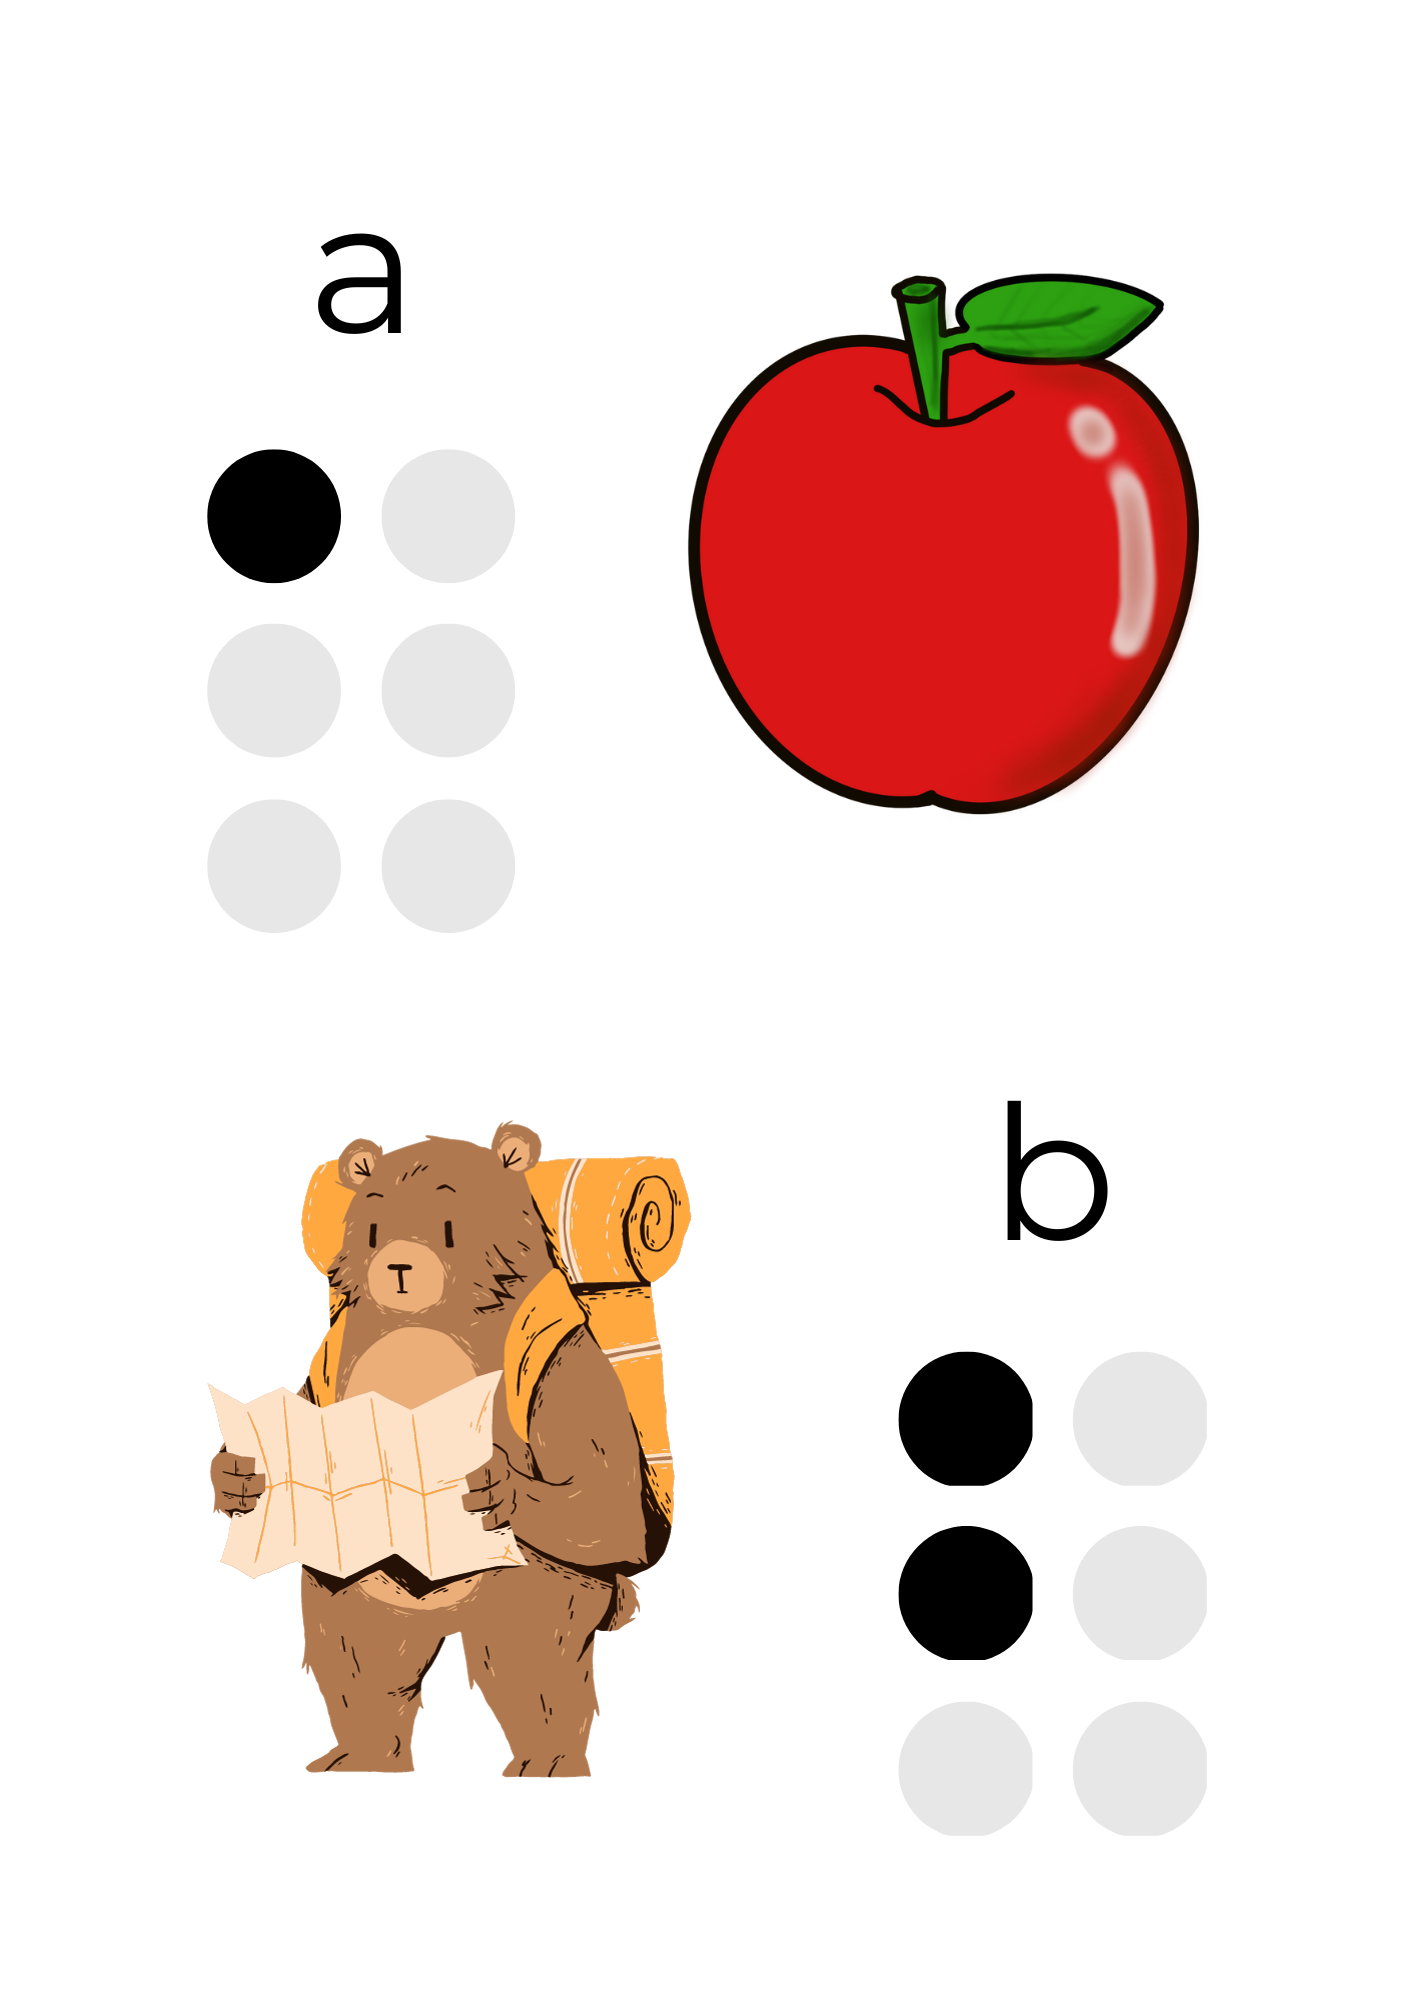 This shows what my braille flashcards look like, each flashcard has the printed letter, the braille equivalent and an image that represents that letter. The letters a and b are shown here so there is an apple and a bear reading a map.